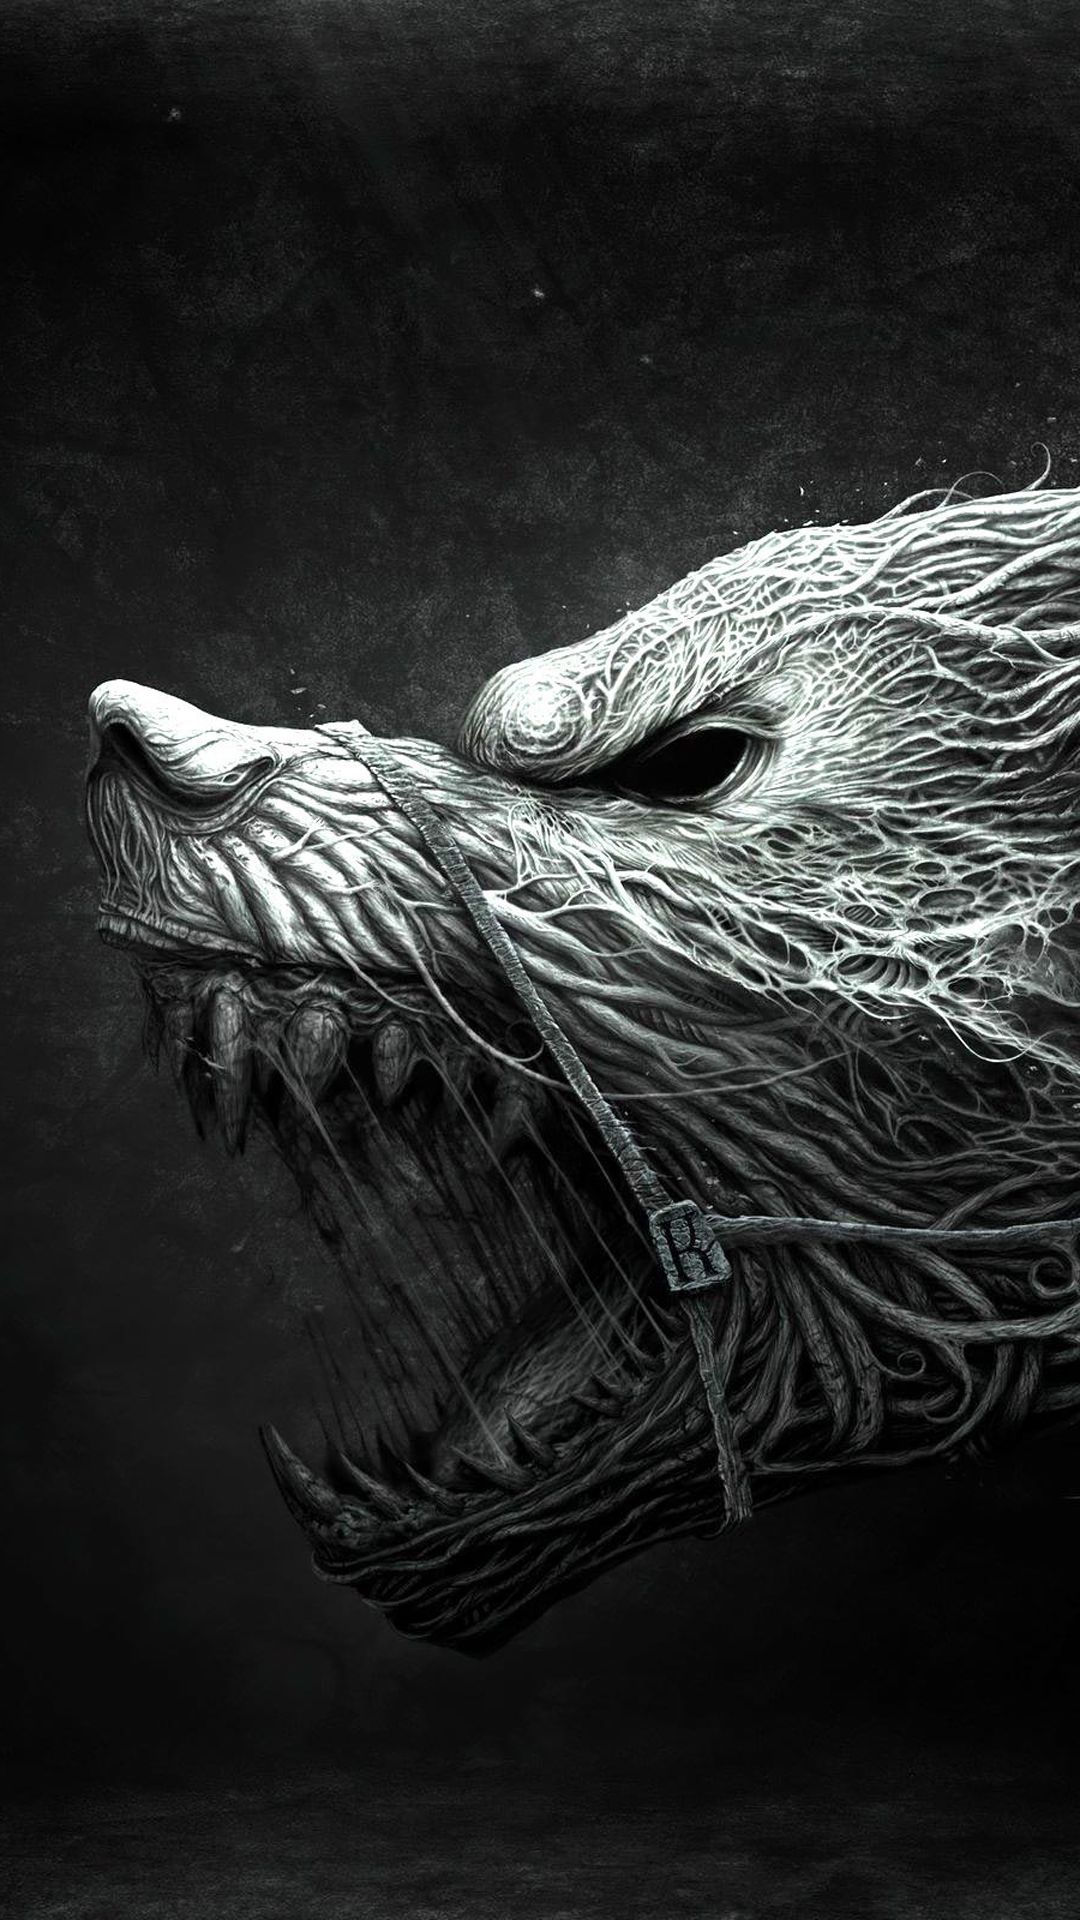 Scary werewolf Halloween htc one wallpaper, free and easy to download